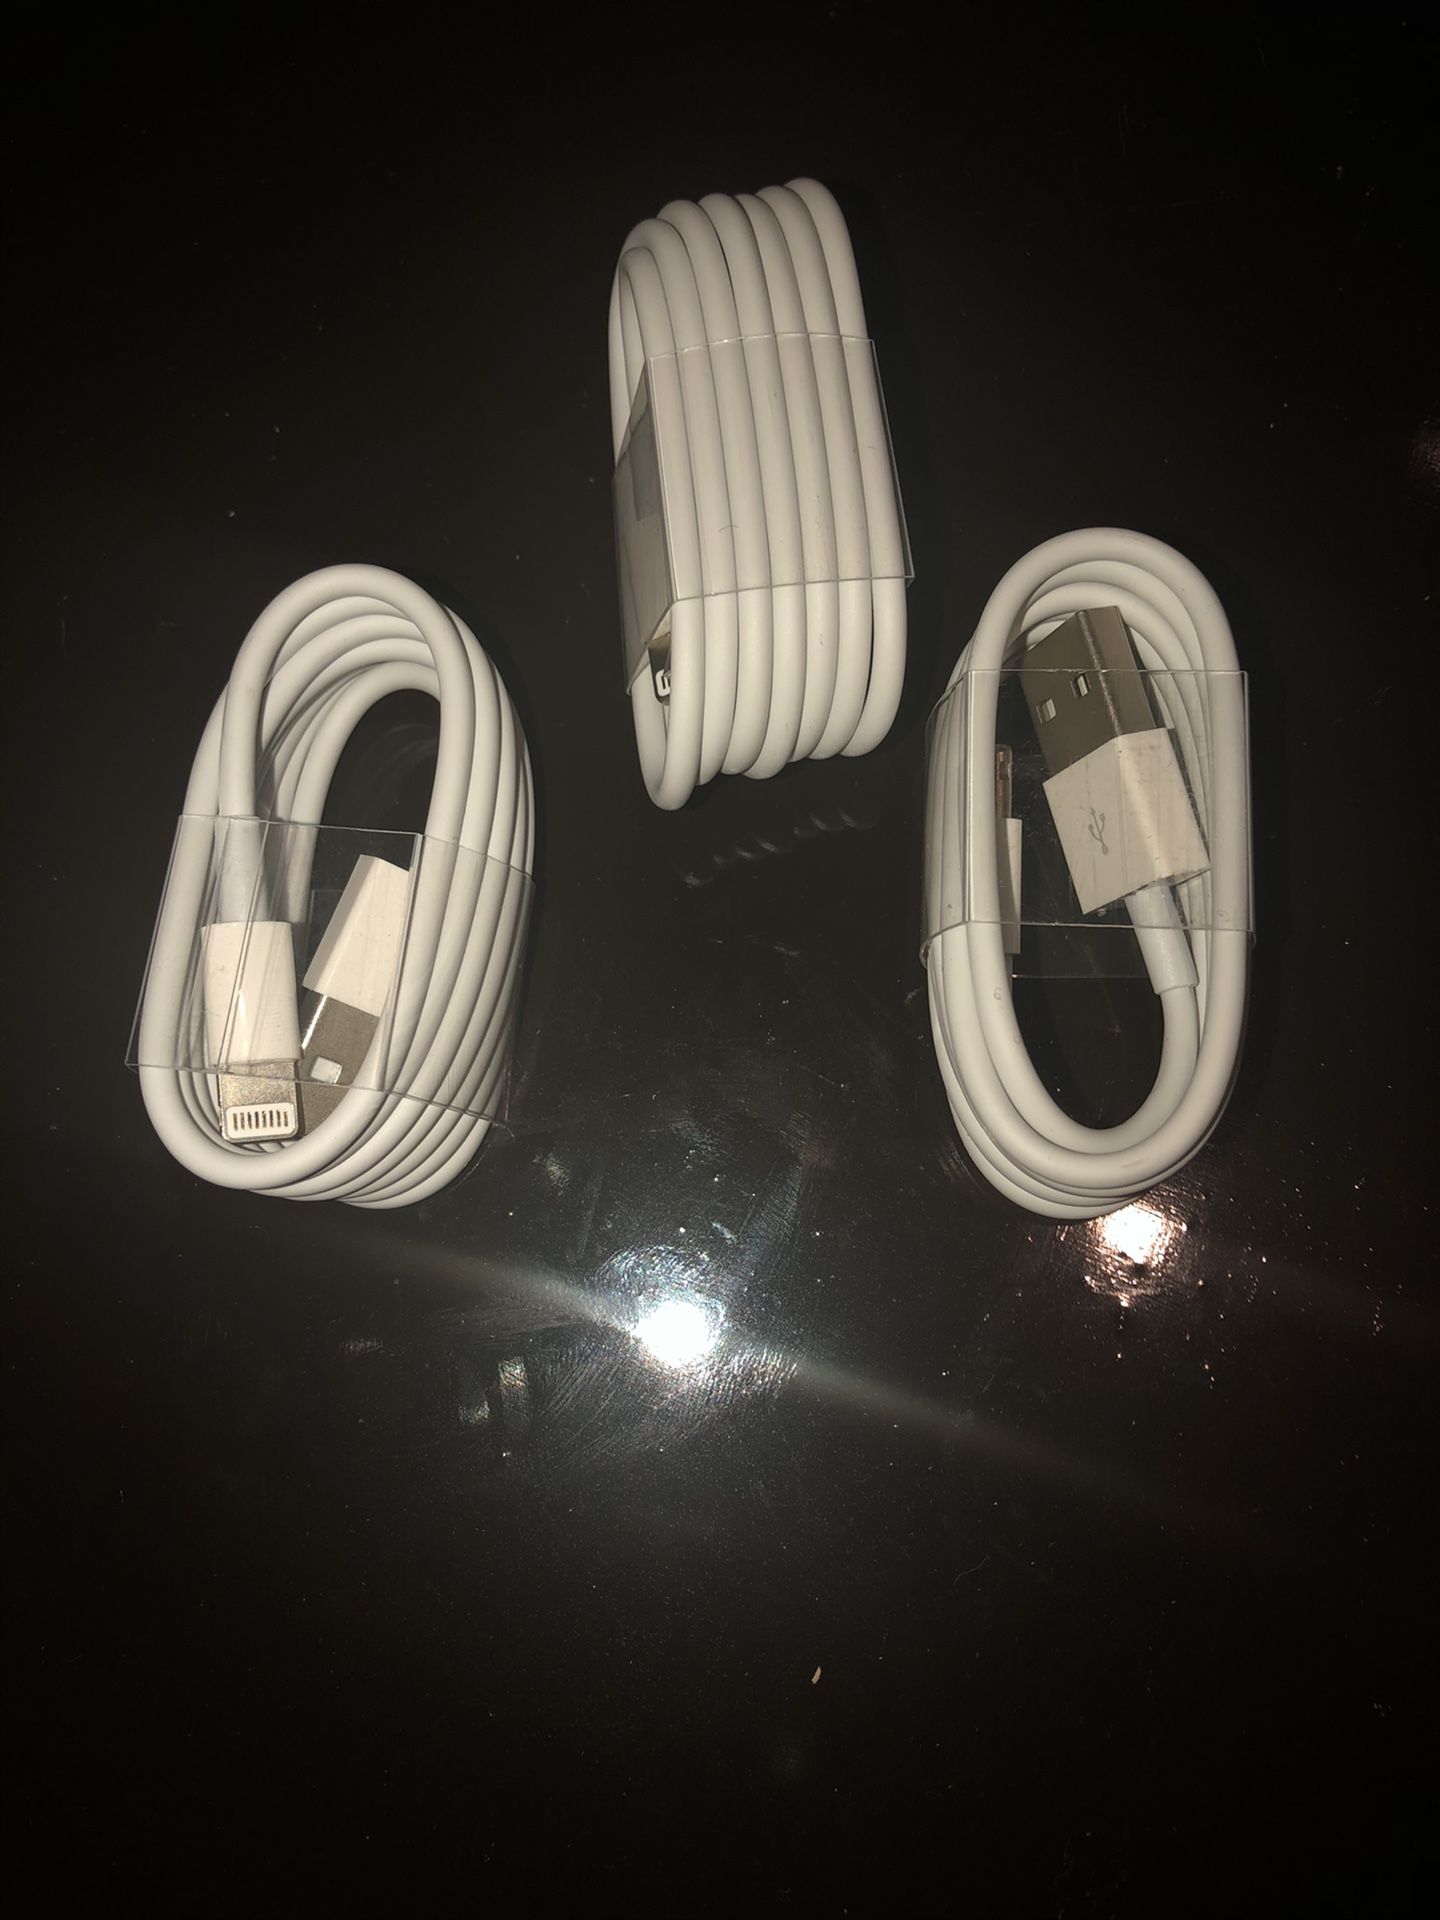 3X Apple Lightning Cable, Iphone Charger Cables